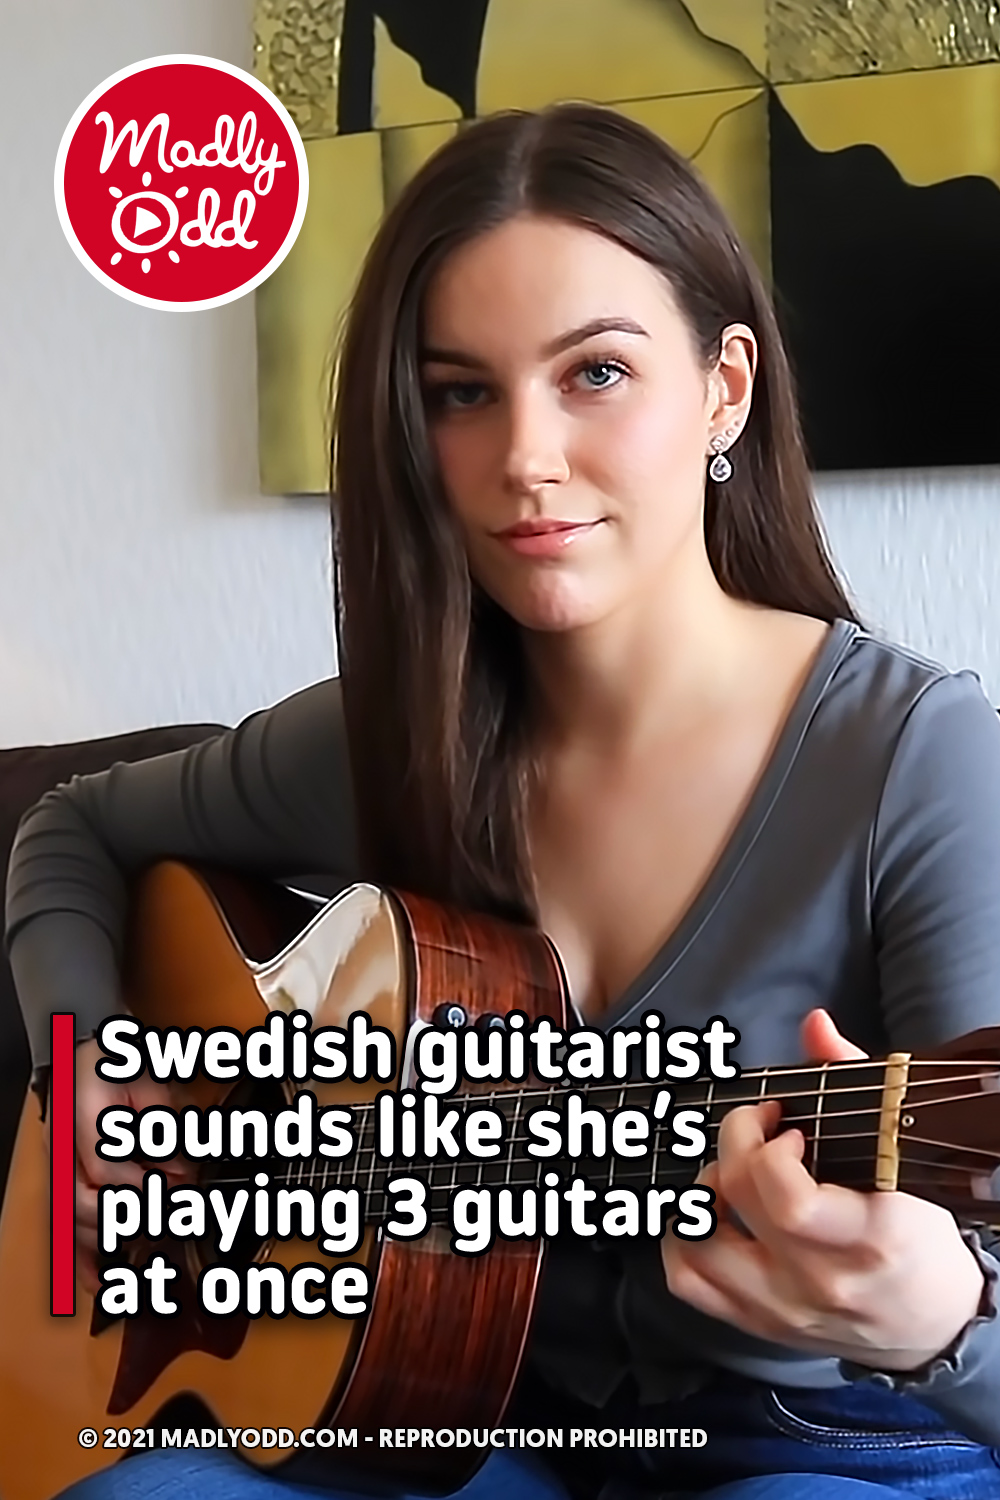 Swedish guitarist sounds like she’s playing 3 guitars at once